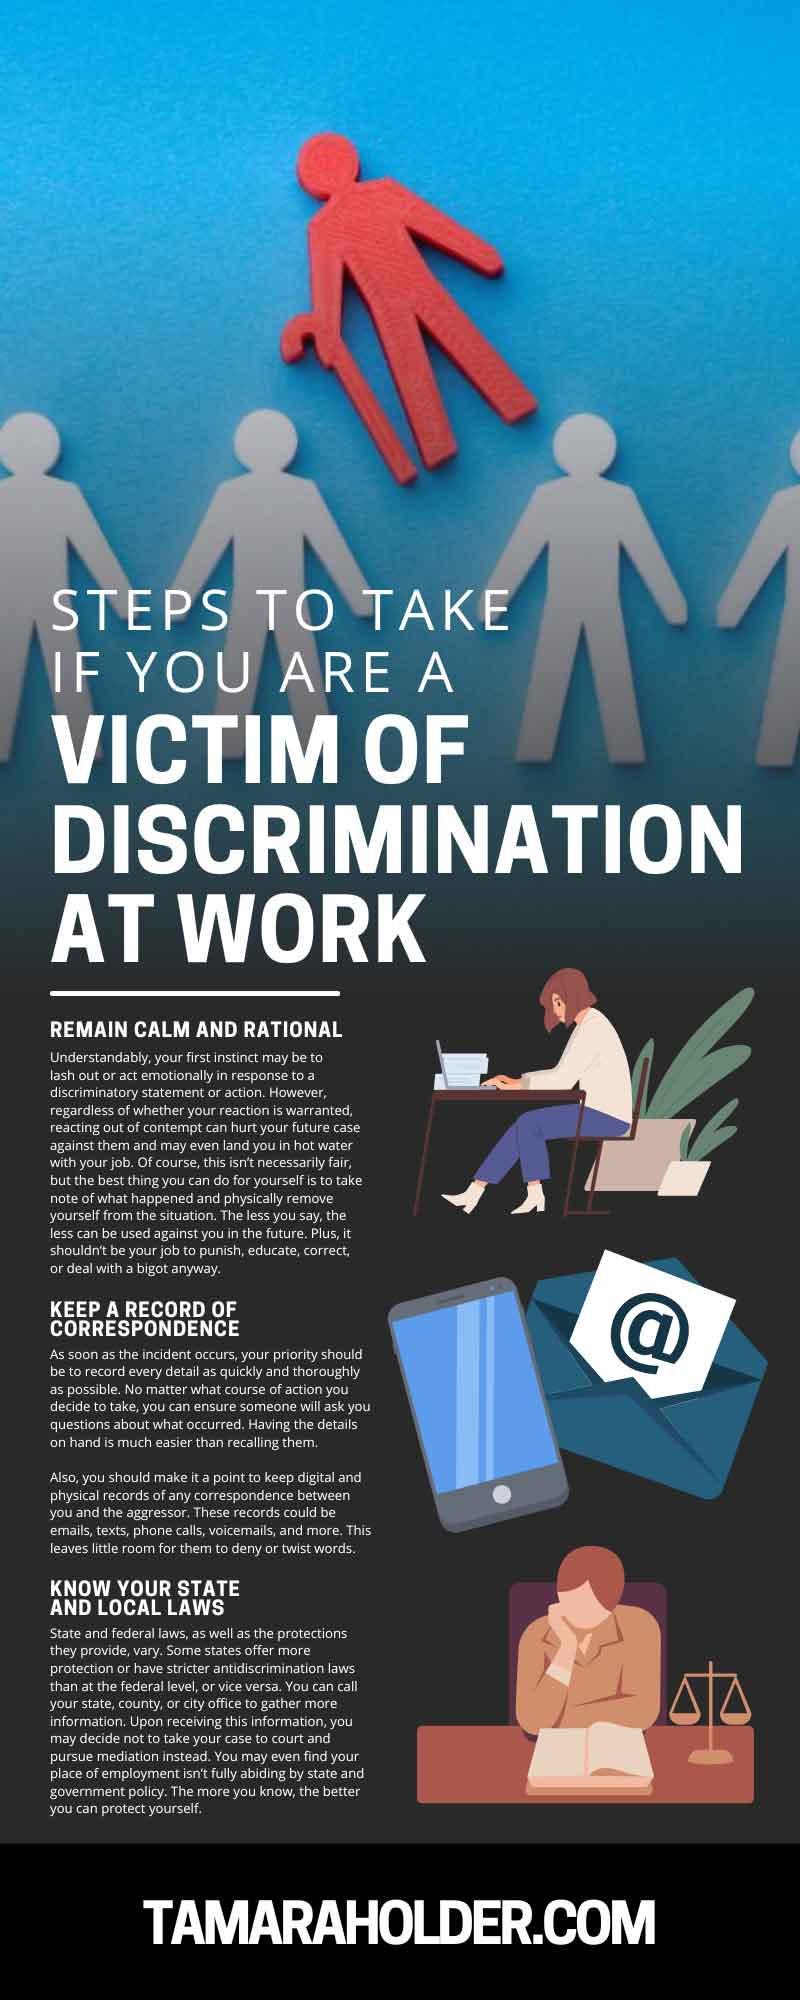 Steps To Take if You Are a Victim of Discrimination at Work
